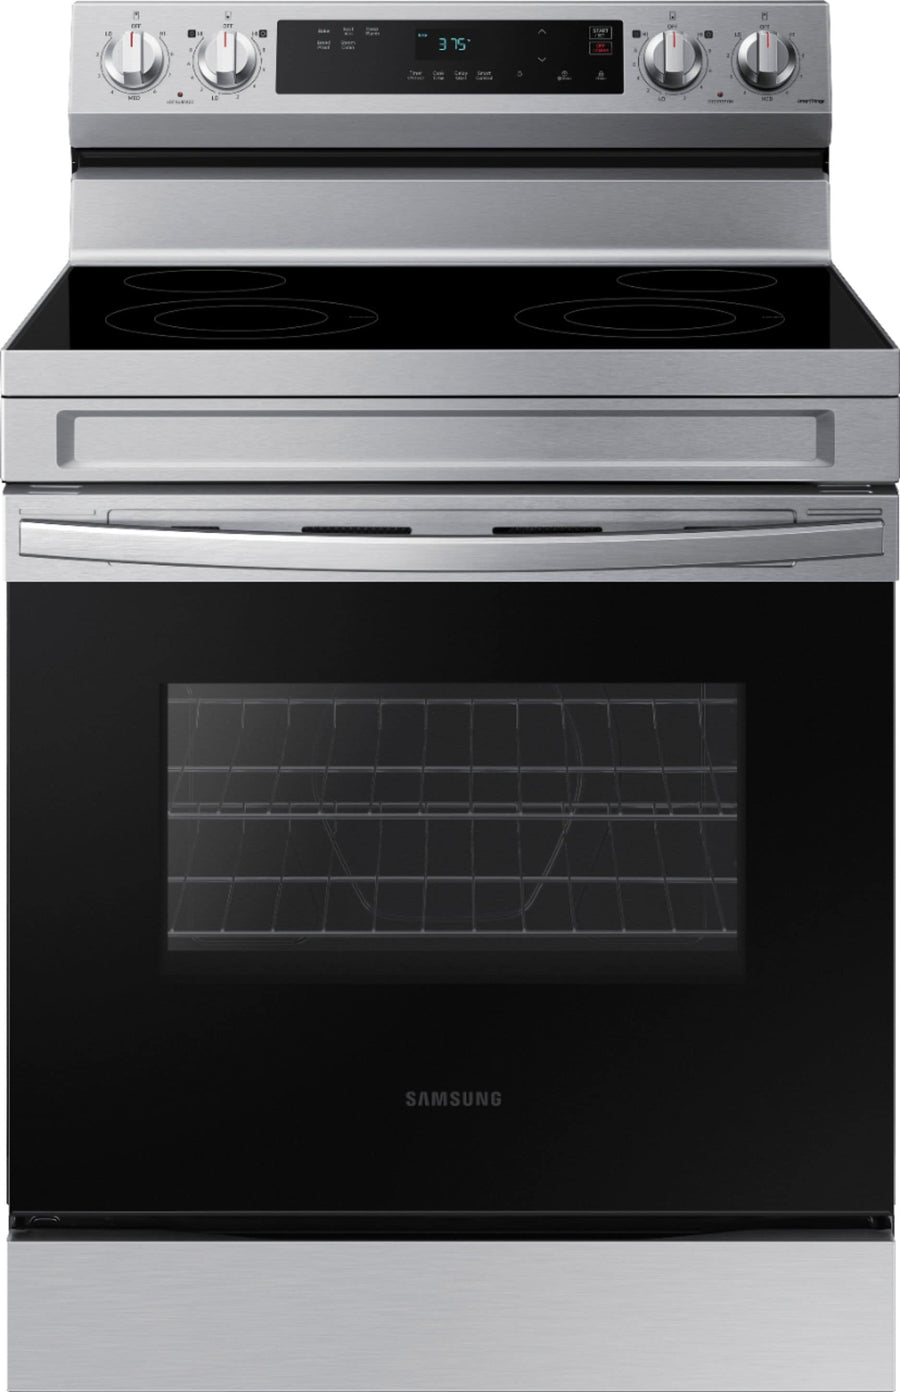 Samsung - 6.3 cu. ft. Freestanding Electric Range with WiFi and Steam Clean - Stainless steel_0